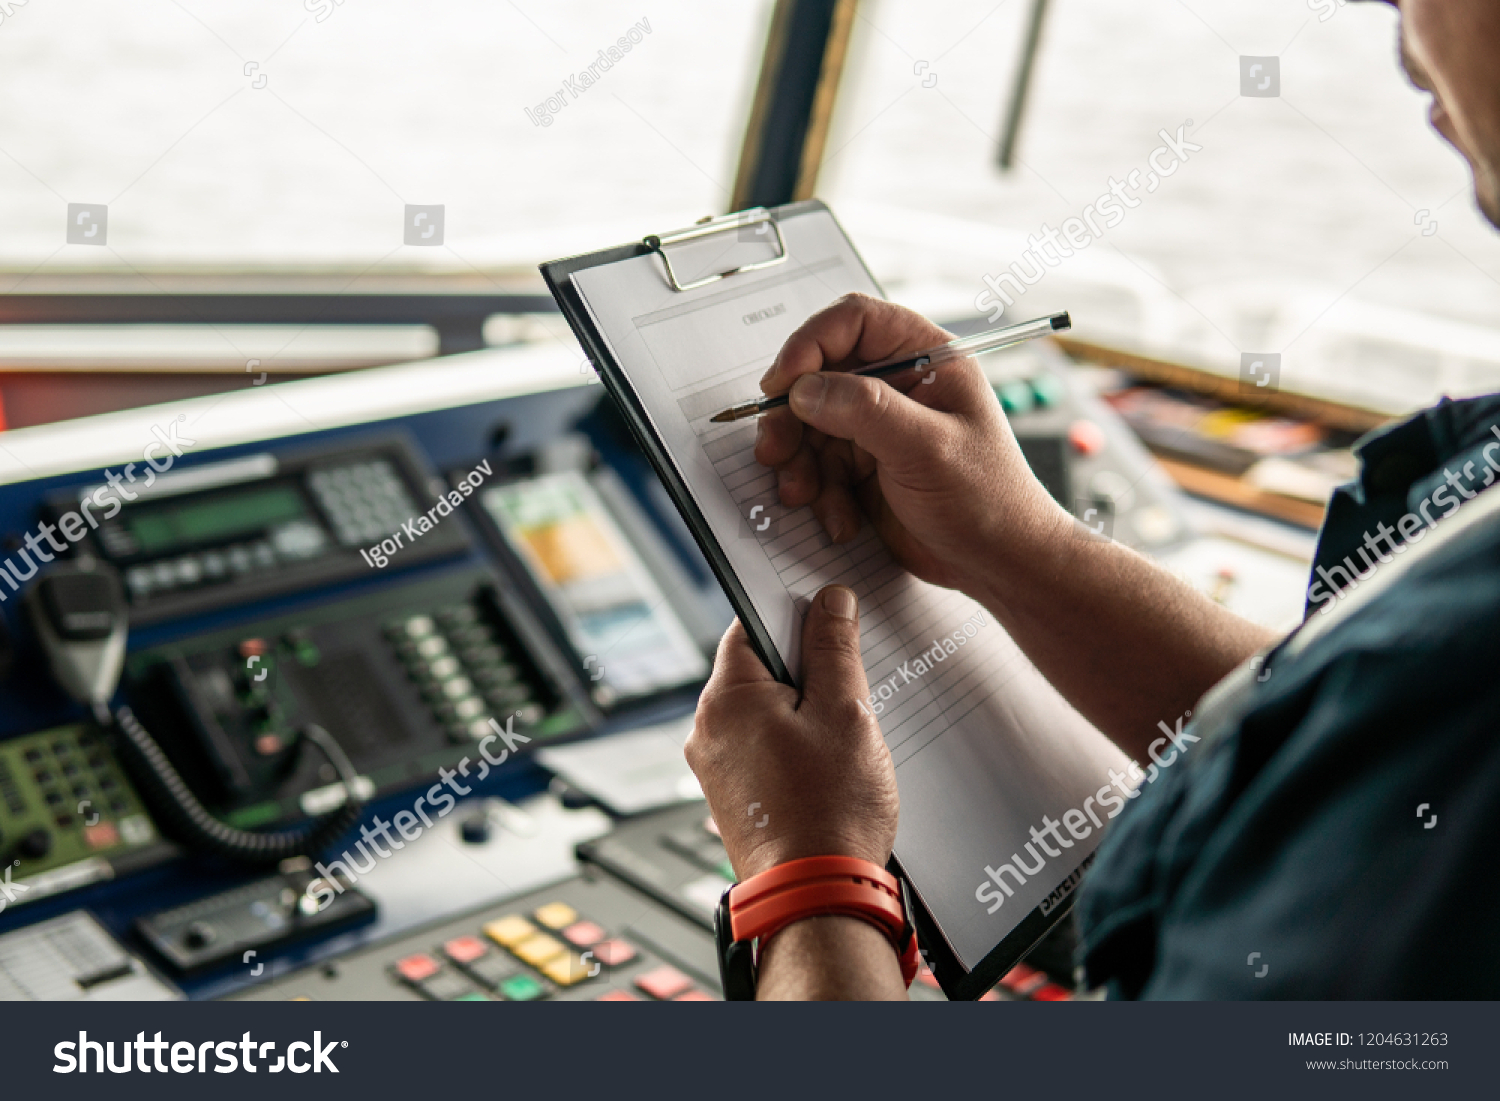 Marine navigational officer or chief mate on navigation watch on ship or vessel. He fills up checklist. Ship routine paperwork #1204631263